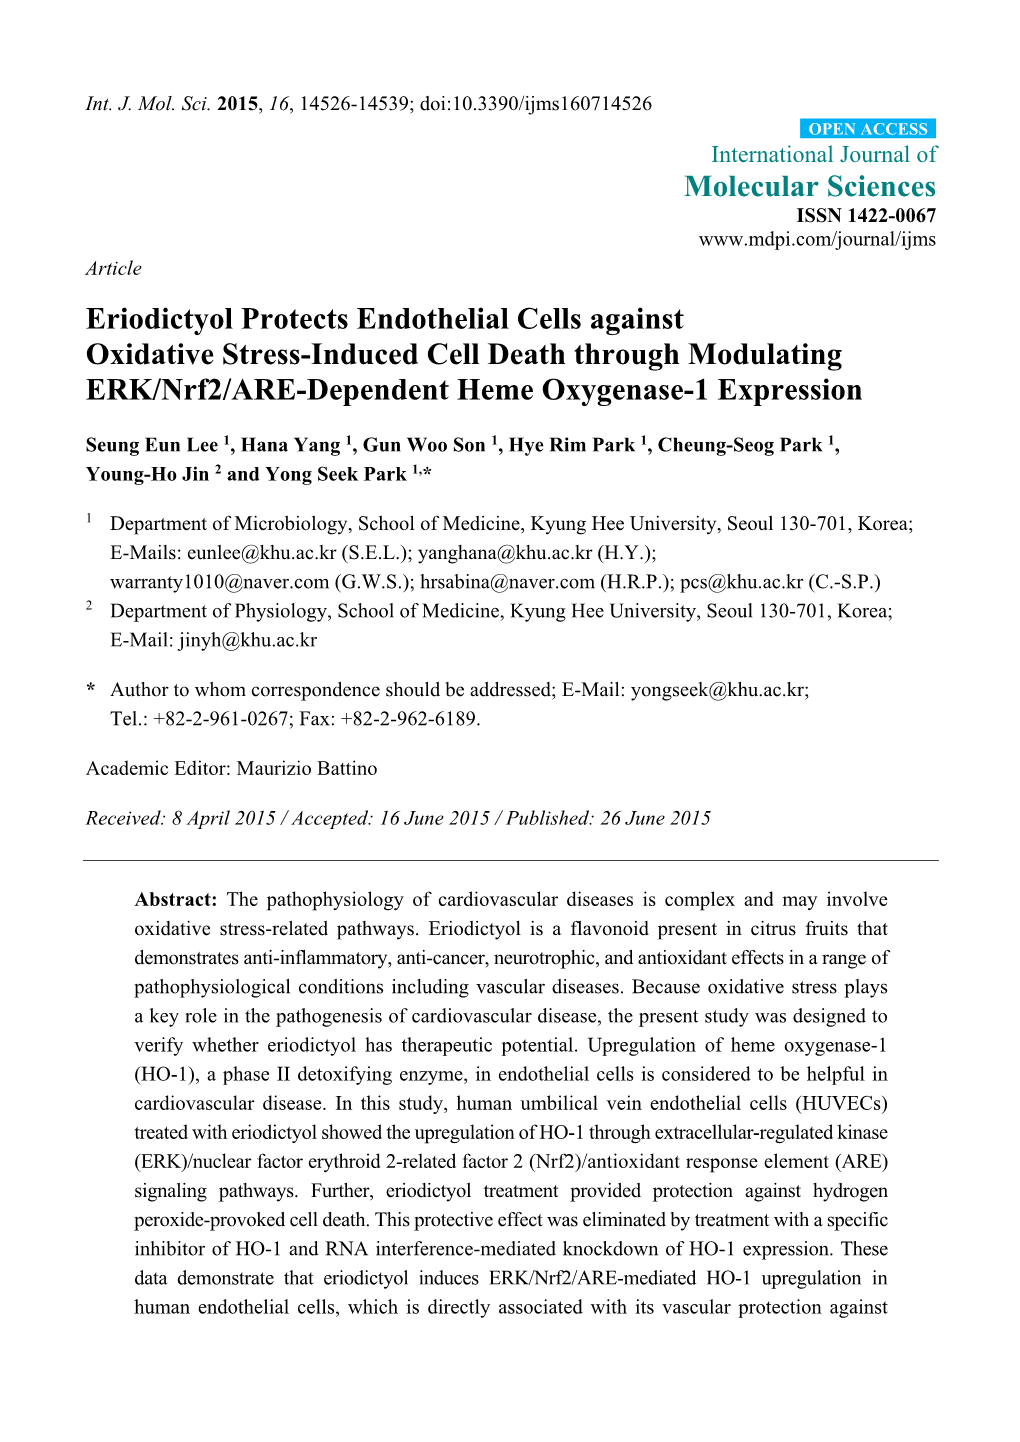 Eriodictyol Protects Endothelial Cells Against Oxidative Stress-Induced Cell Death Through Modulating ERK/Nrf2/ARE-Dependent Heme Oxygenase-1 Expression